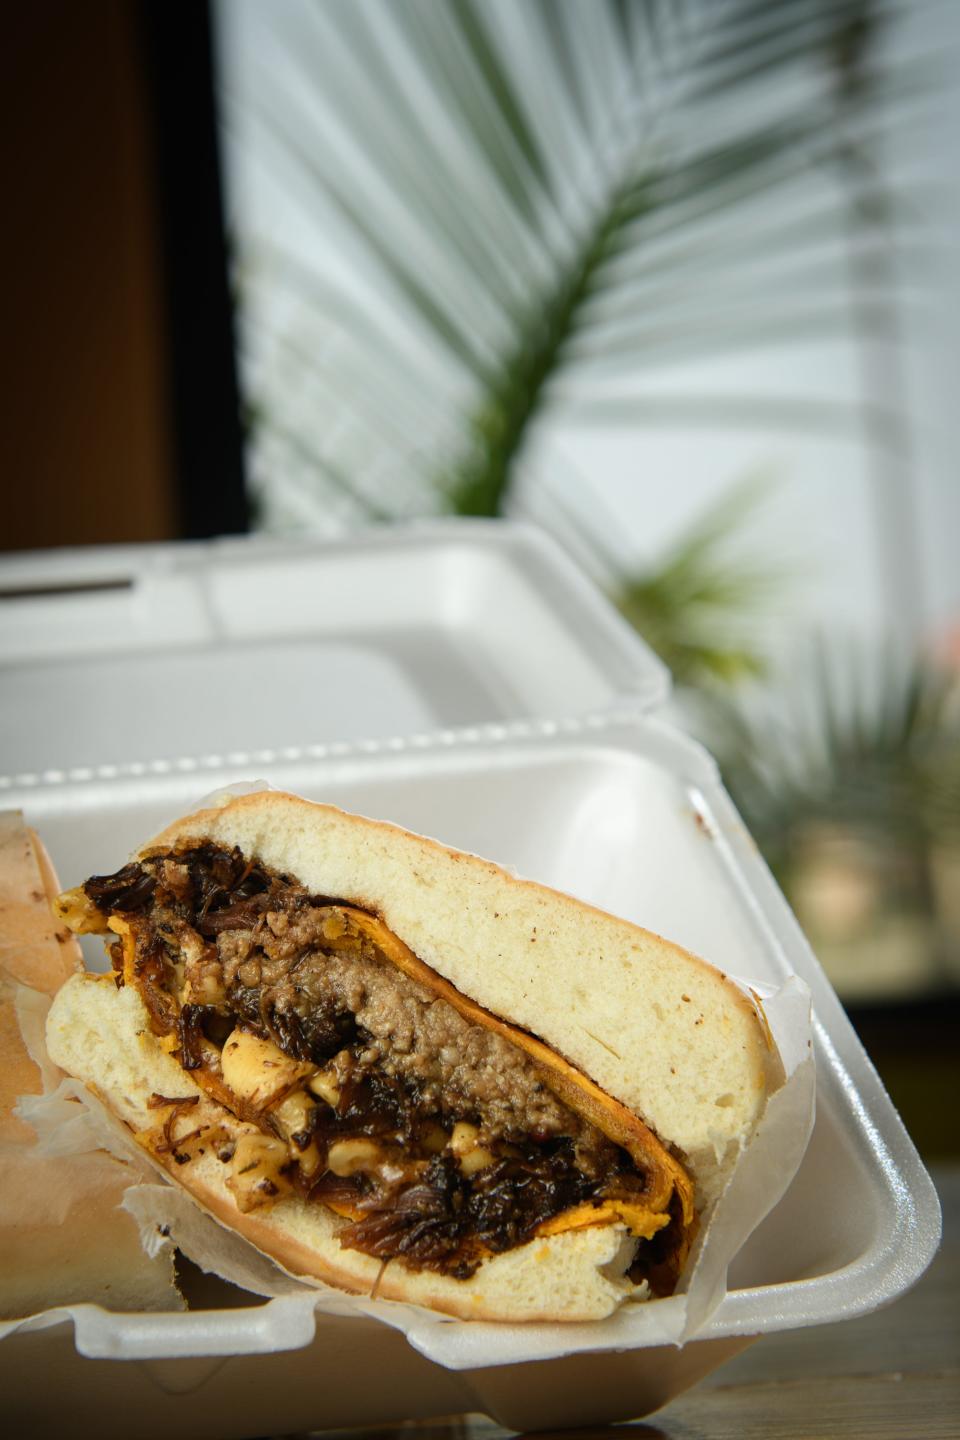 Mac Patty Oxtail sandwich from SimLo's Island Cafe at 3057 Boone Trail Ext.